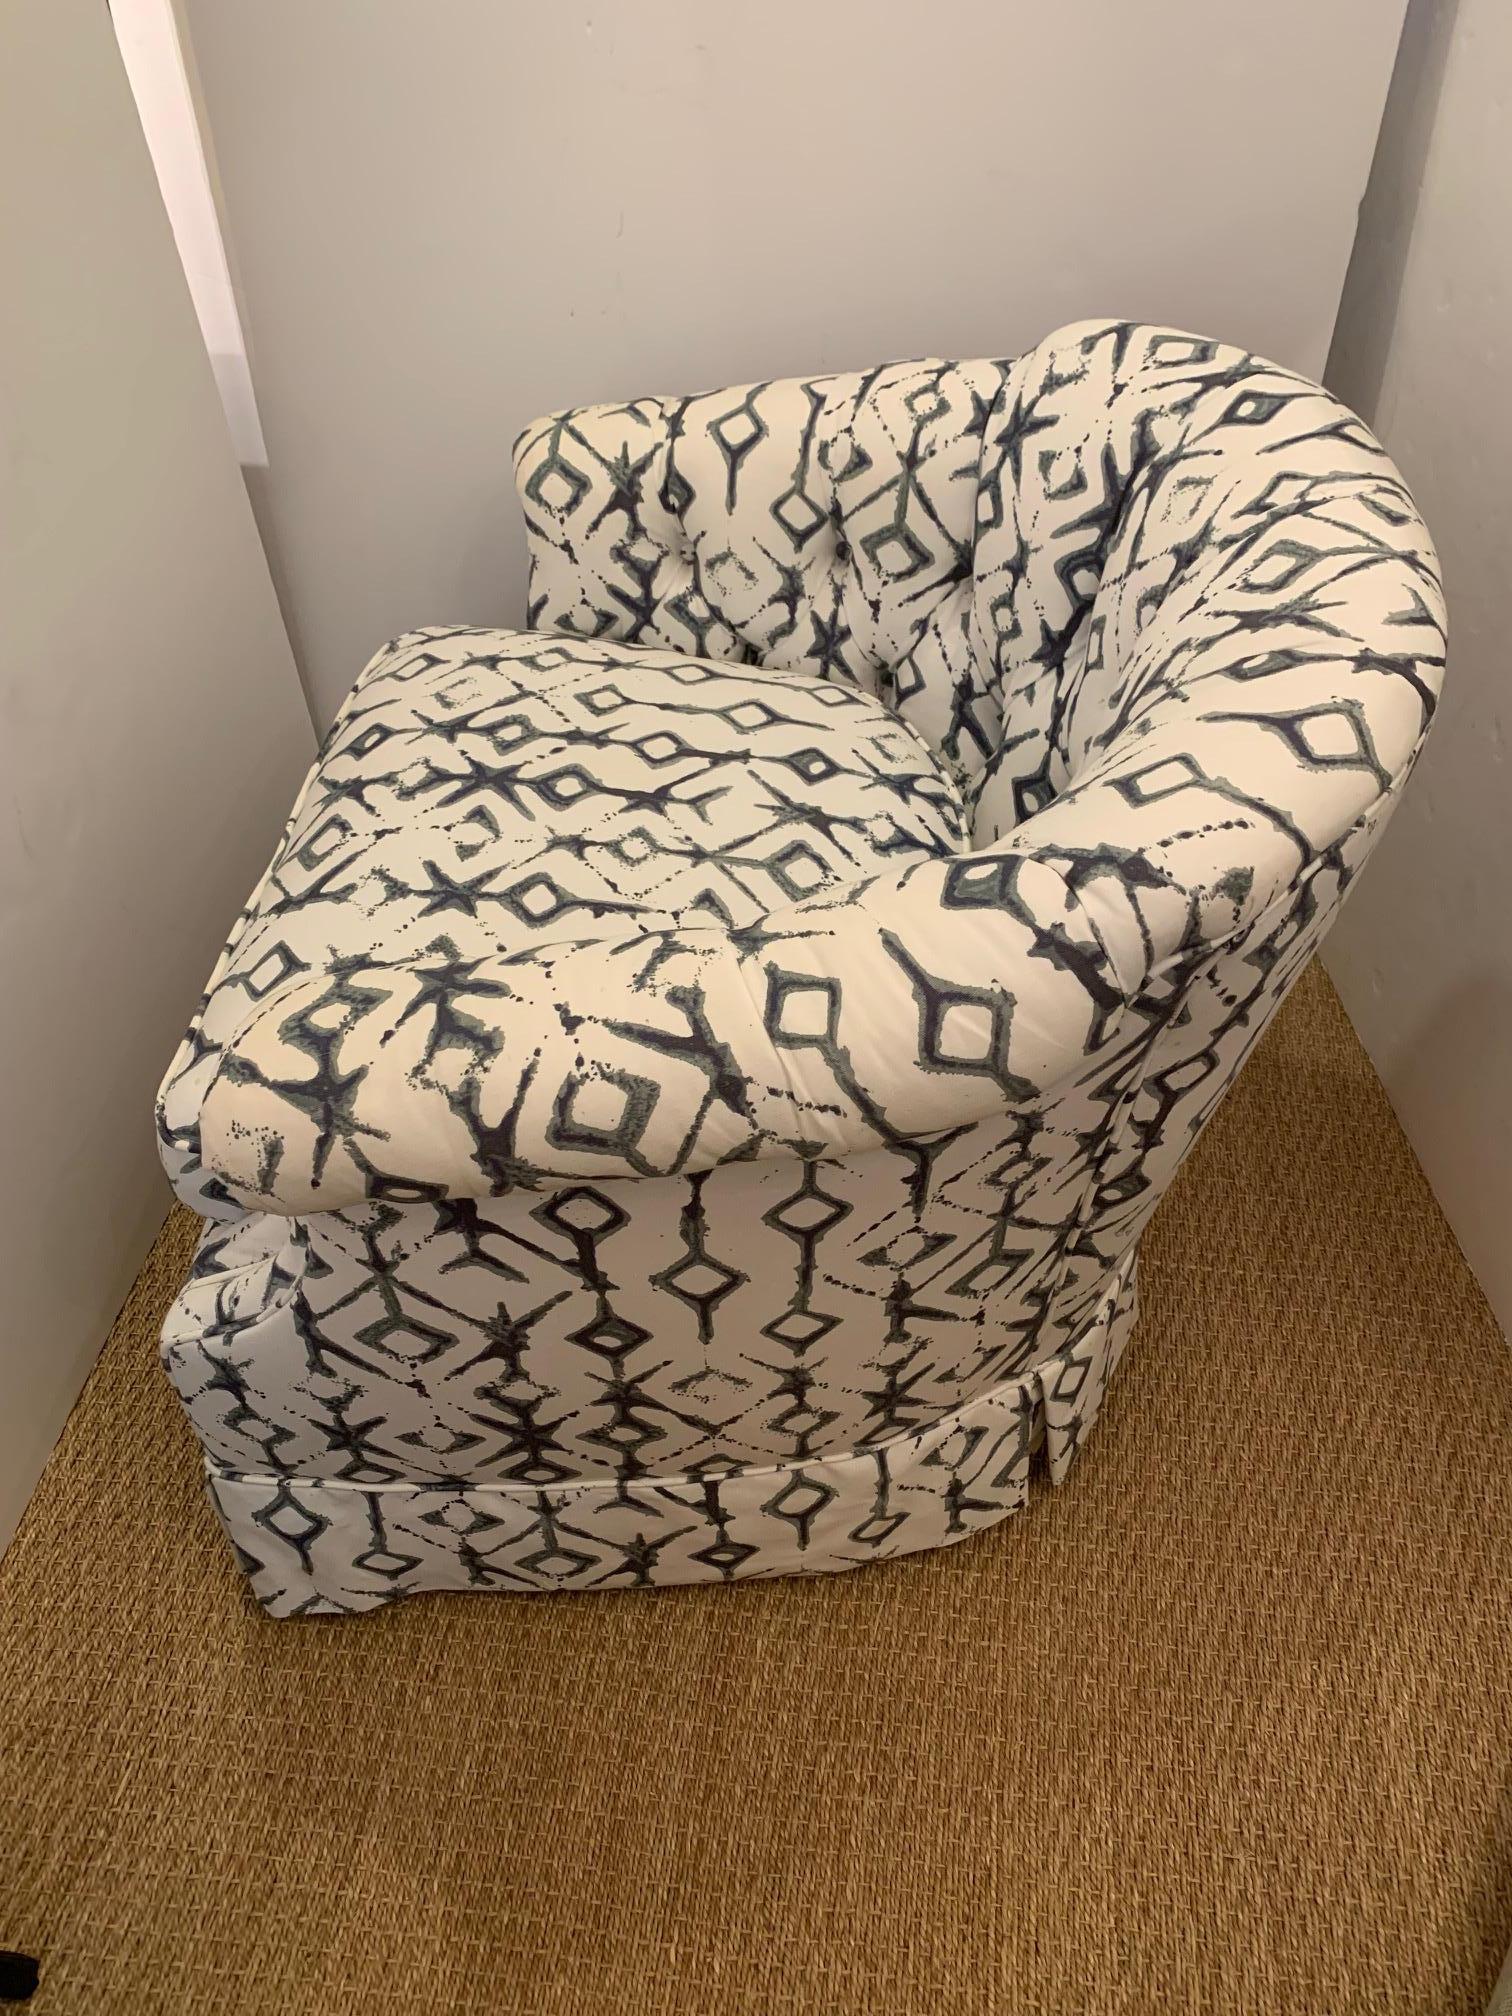 Inviting comfy swivel upholstered club chair having a contemporary ikat inspired design and button tufted interior back. Looks stylish from every angle.
Measures: Seat height 17 D 21
Arm height 23.